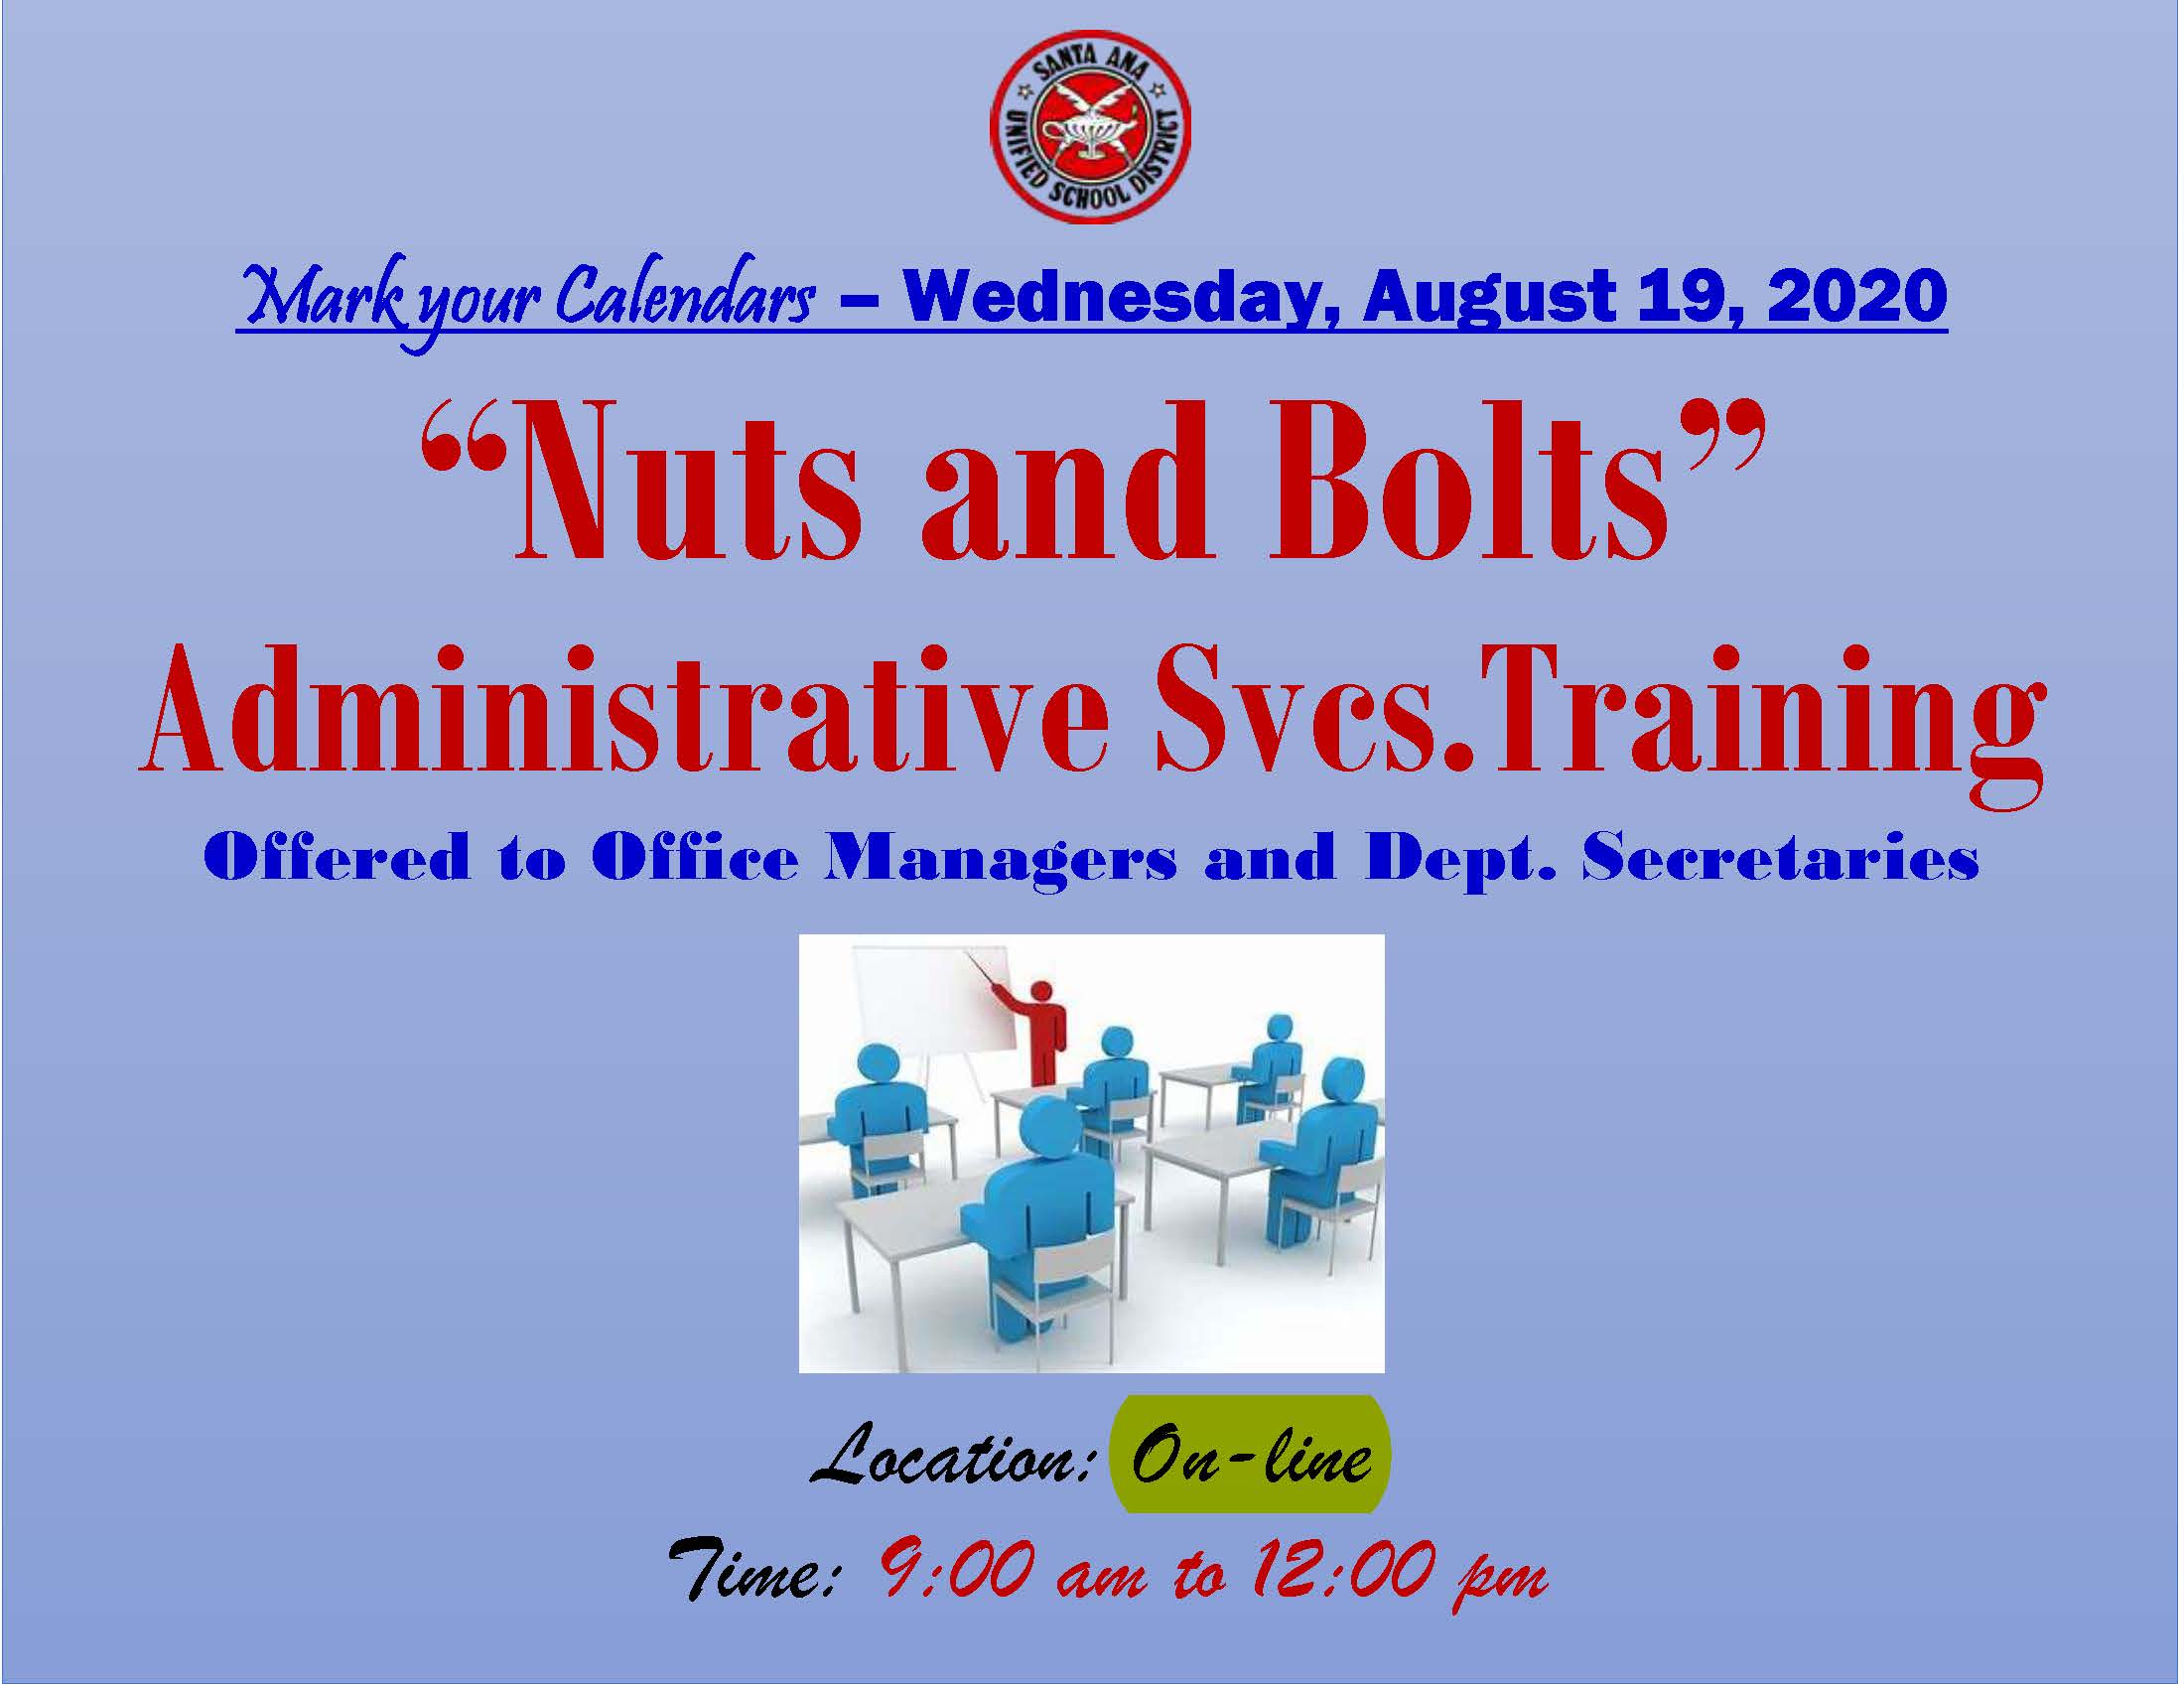 08.19.20 Nuts and Bolts Admin. Svcs. Training - Office Managers.jpg